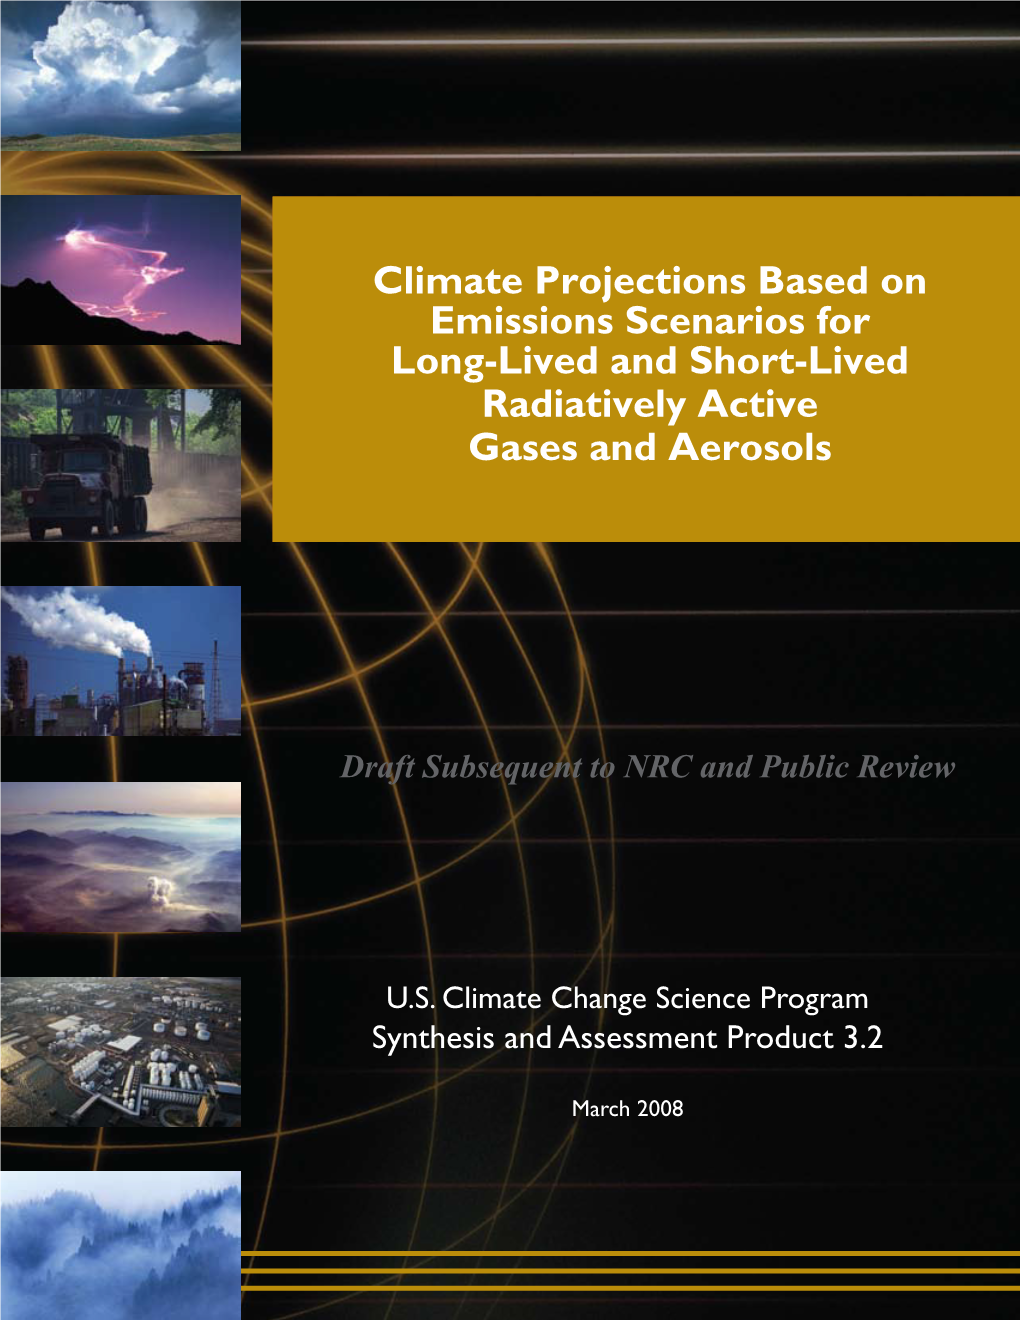 Climate Projections Based on Emissions Scenarios for Long-Lived and Short-Lived Radiatively Active Gases and Aerosols SYNOPSIS